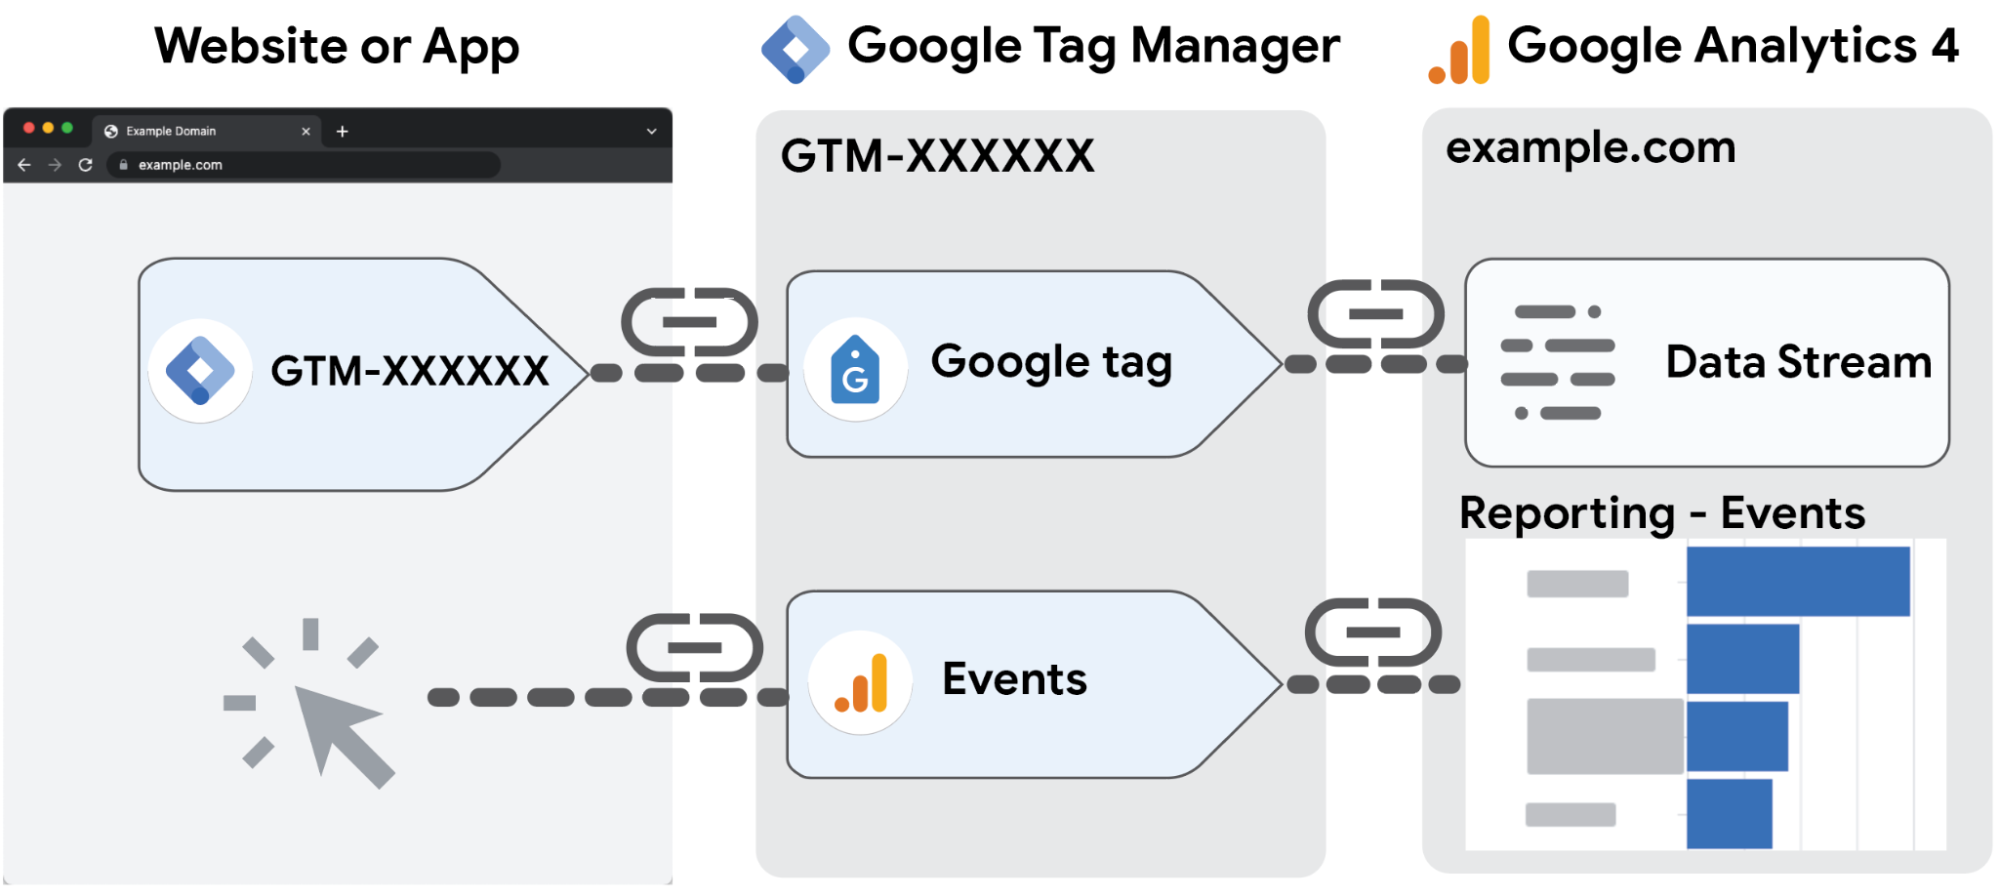 Diagram that shows how Google Tag Manager relates with your website or app and Google Analytics 4. The Google Analytics Configuration tag ensures data flow from your website to Google Analytics. The Events tag lets you set up events without writing code.